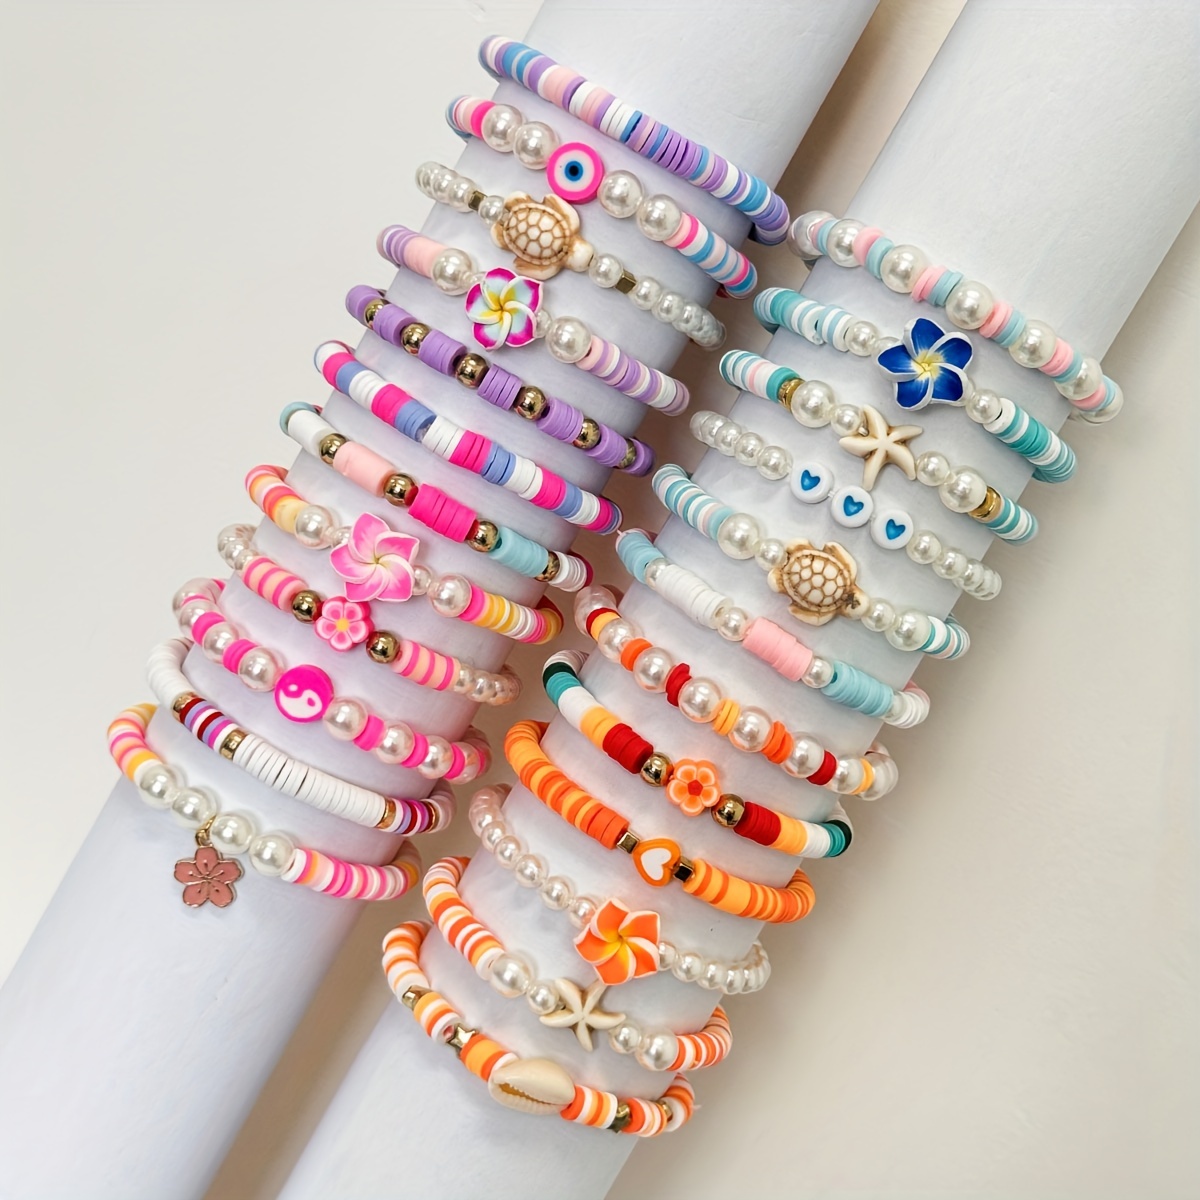 

Boho-chic 24pc Colorful Beaded Bracelet Set - Y2k Inspired, Stretchable Heishi Jewelry For Women & Girls - Perfect Summer Beach Accessory & Gift